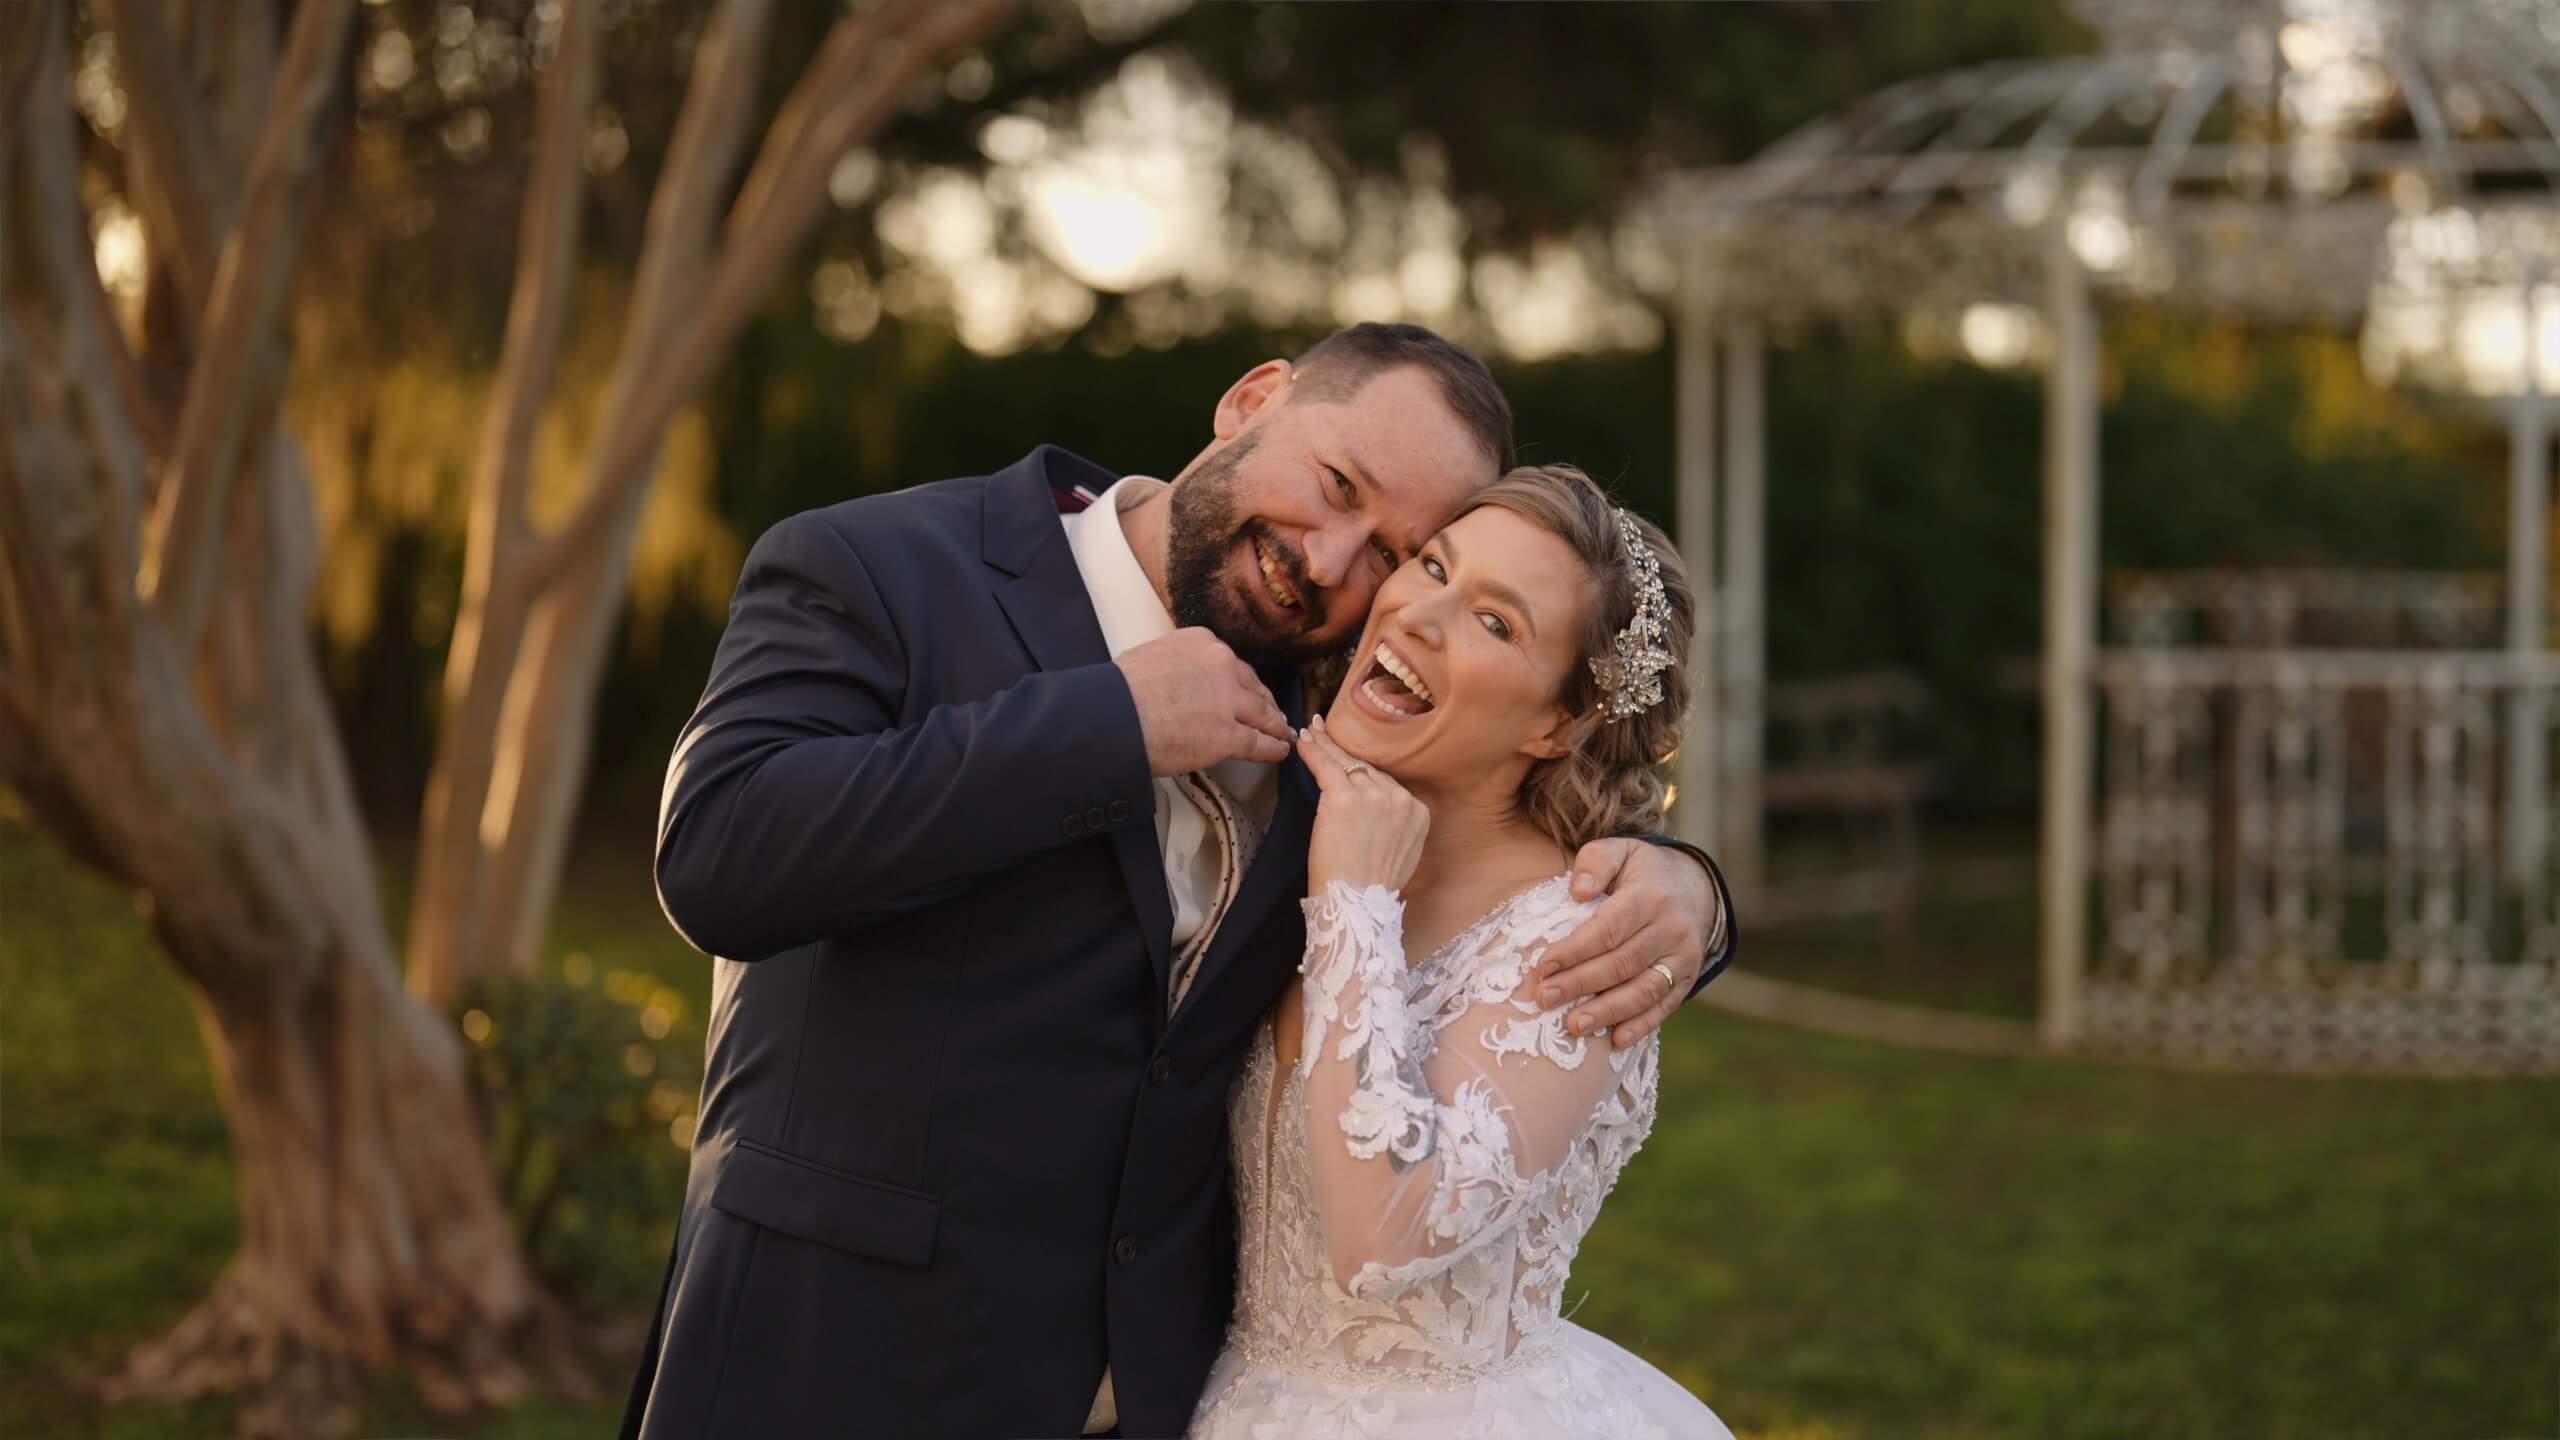 Jessica + Lawrence Short Film // Mulgoa Valley Receptions // Blue Mountains Wedding Videography